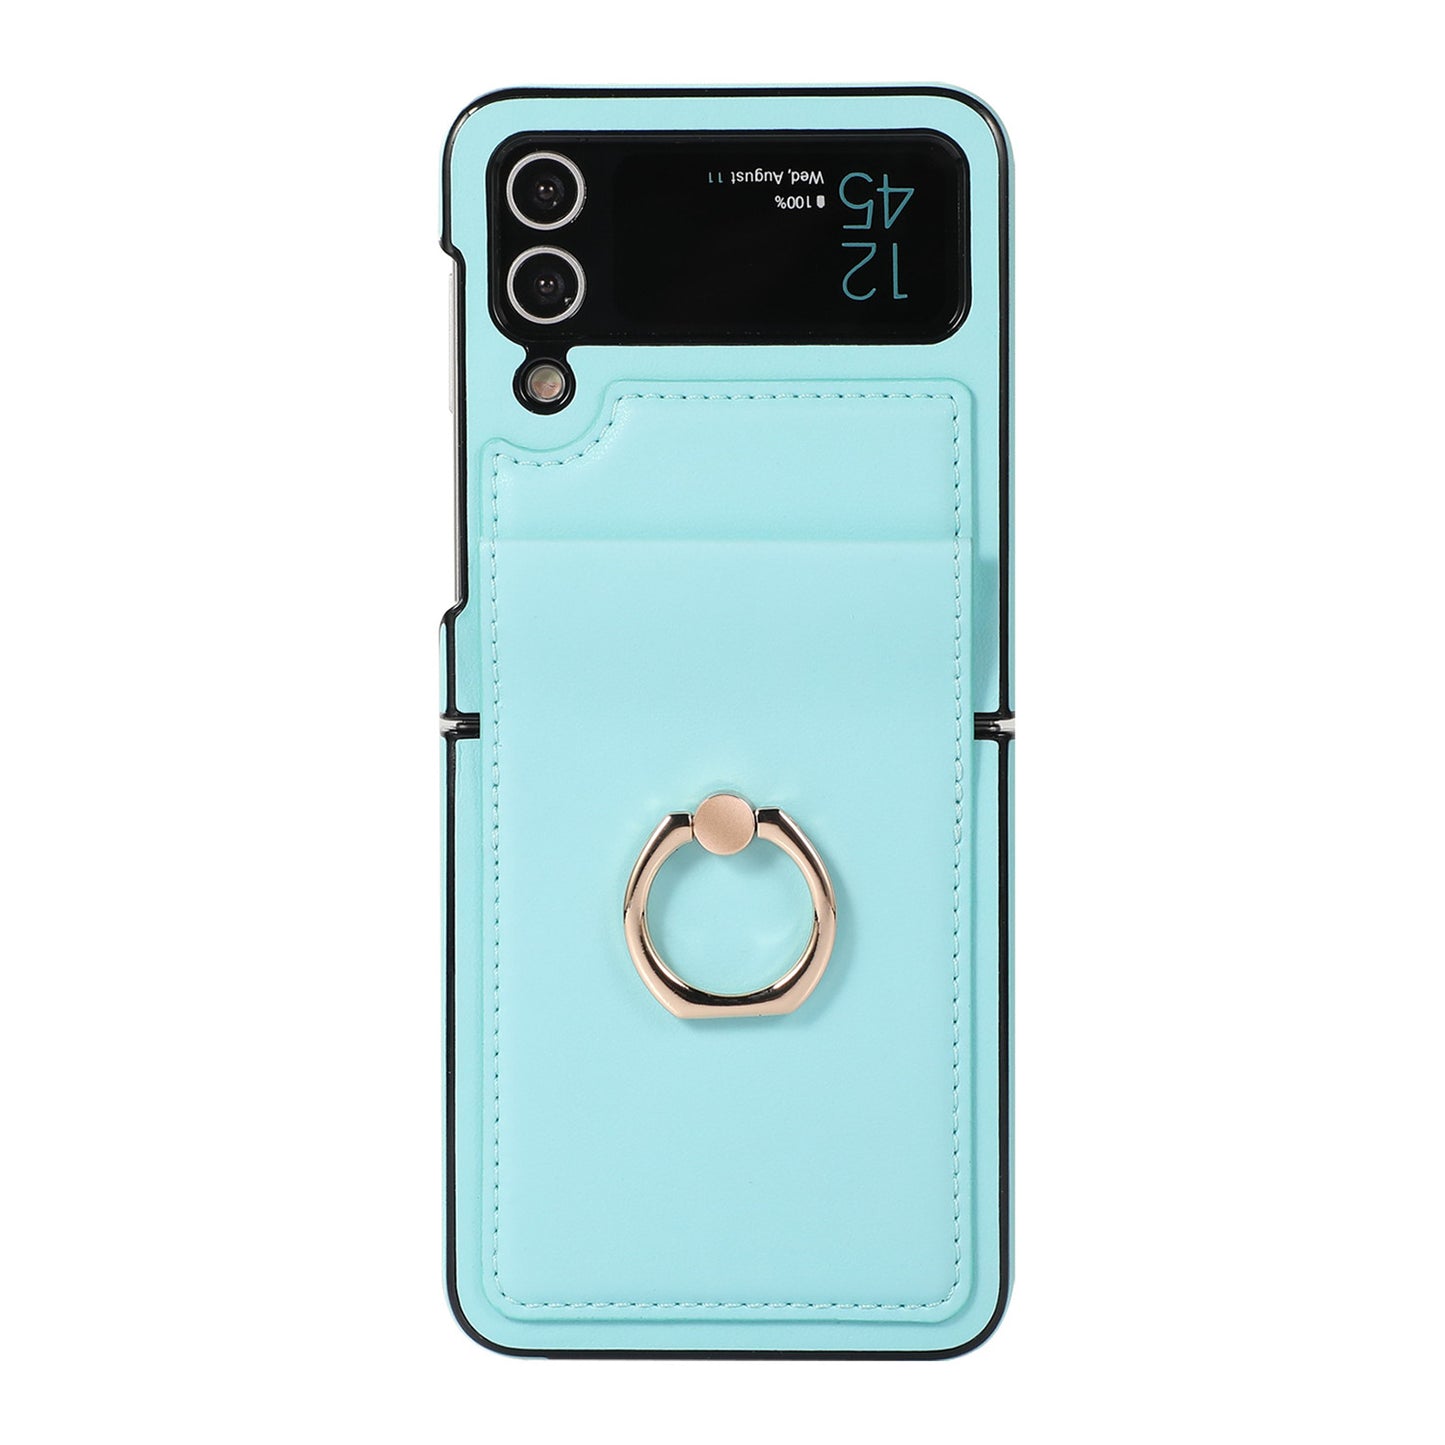 PU Leather Flip With Money Bag Clip Phone Case